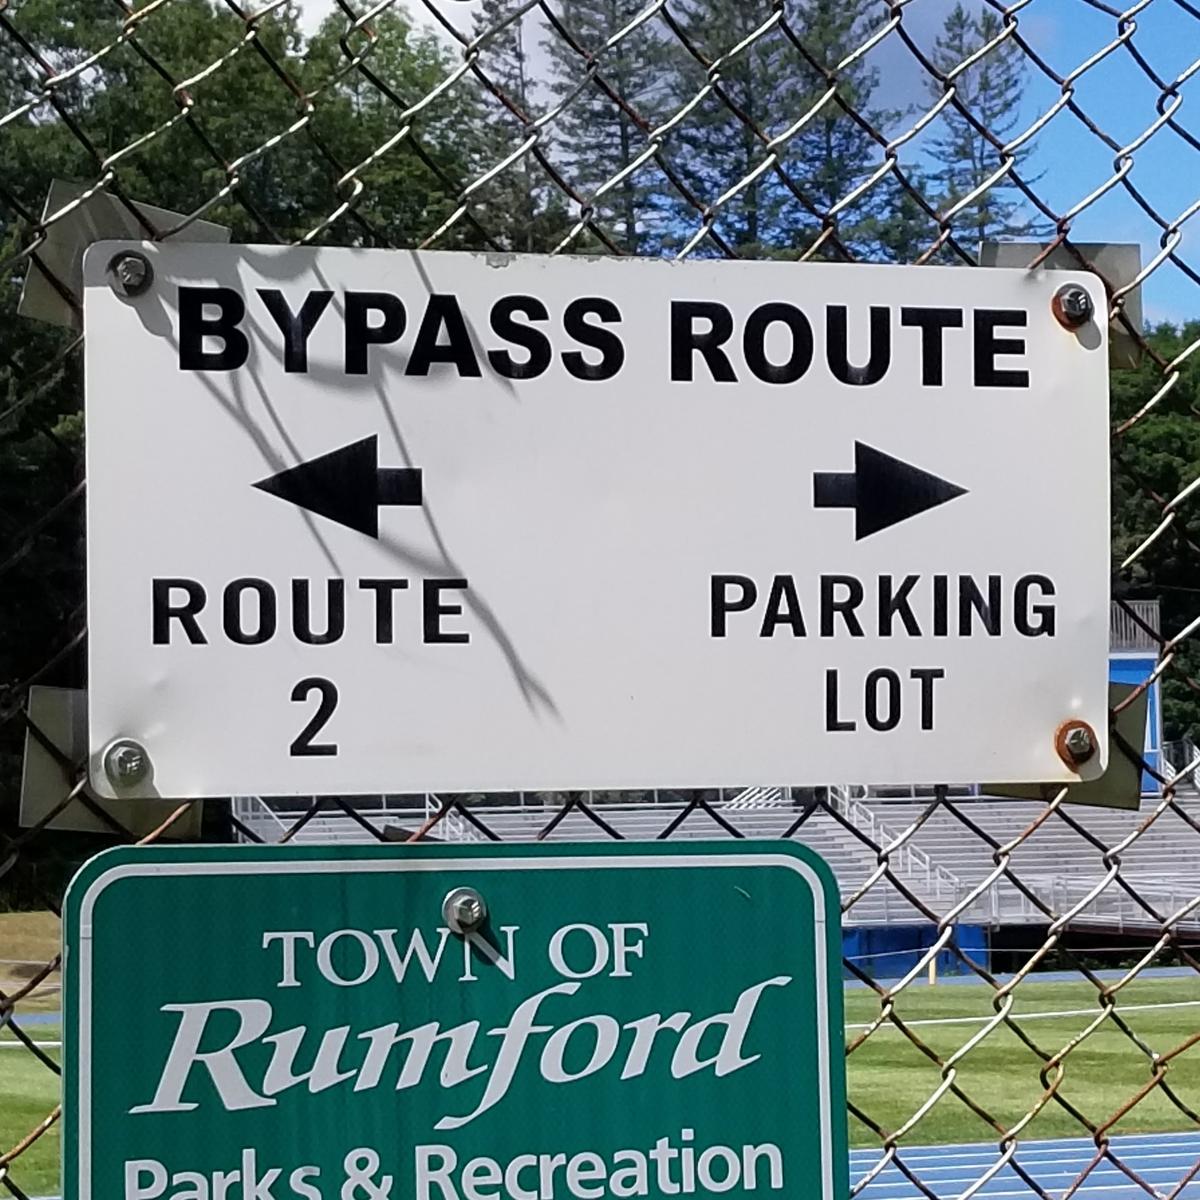 Sign at the end of the trail indicating where to turn to reach the parking lot.